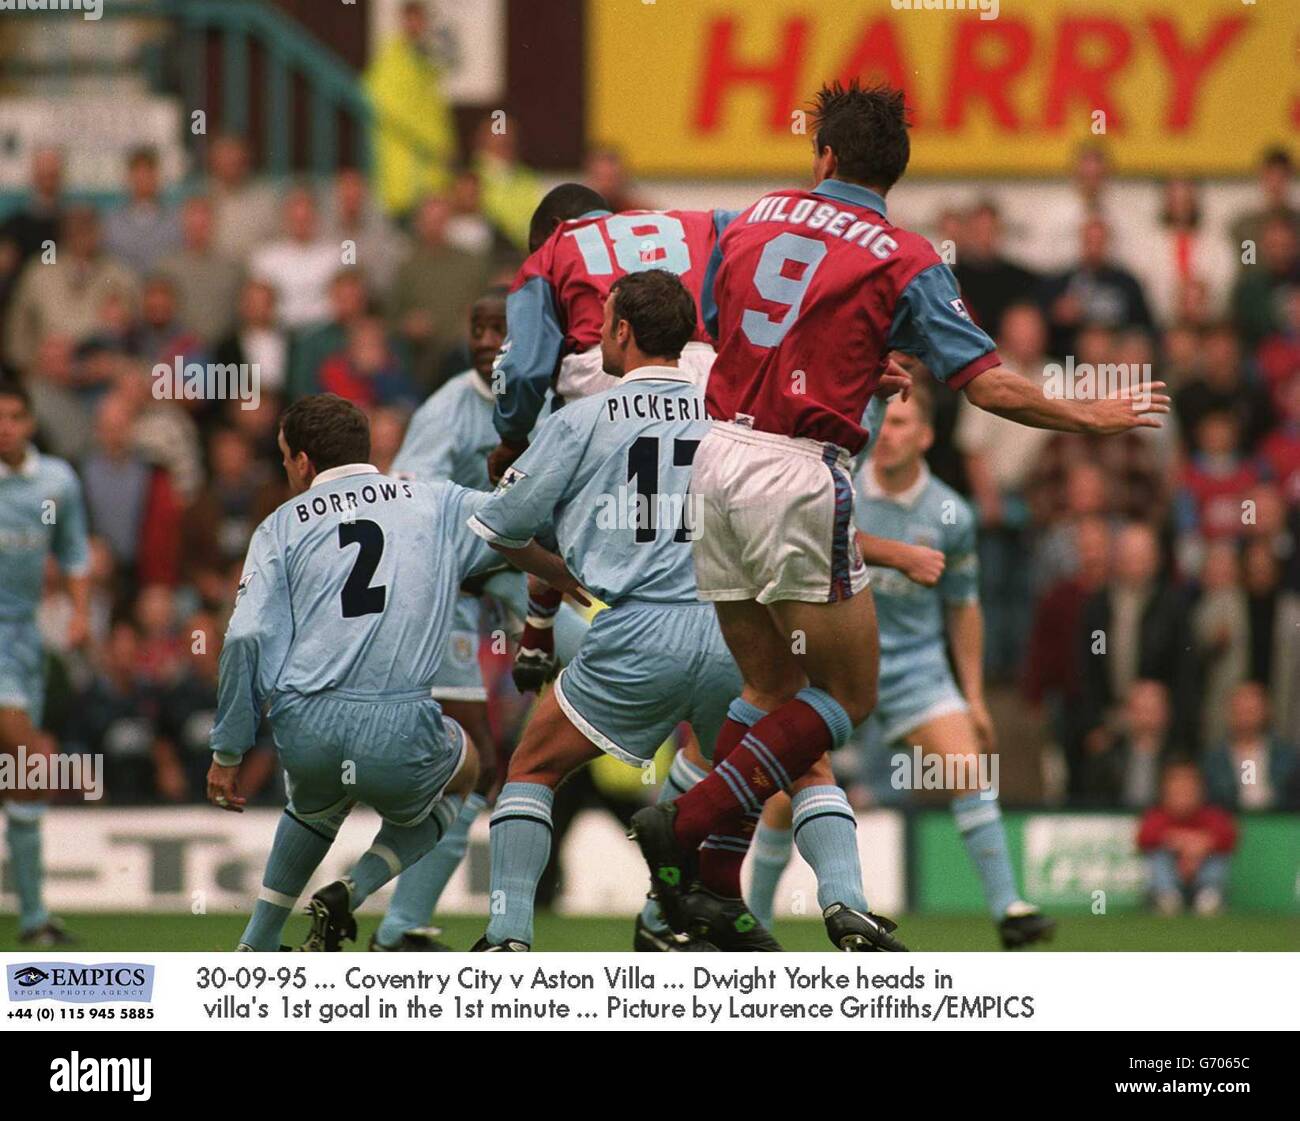 30-09-95 ... Coventry City v Aston Villa ... Dwight Yorke heads in villa's 1st goal in the 1st minute ... Picture by Laurence Griffiths/EMPICS Stock Photo